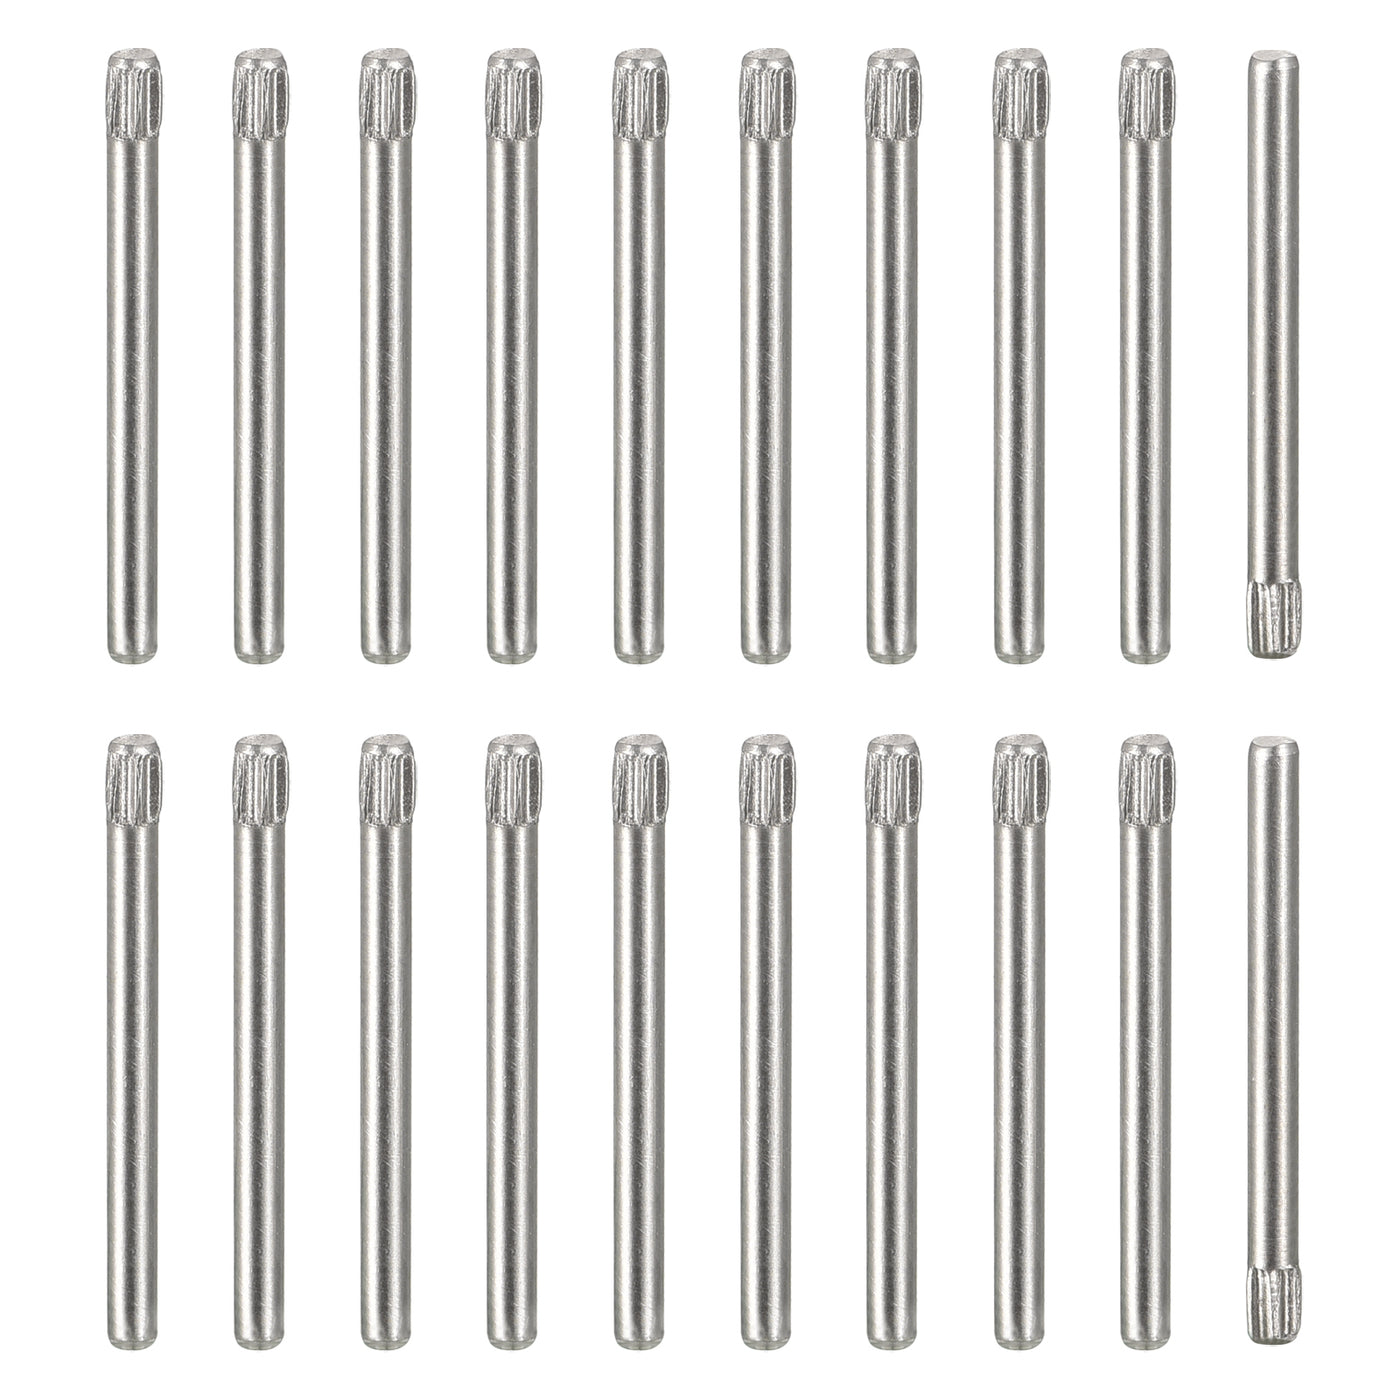 uxcell Uxcell 1.5x18mm 304 Stainless Steel Dowel Pins, 20Pcs Knurled Head Flat End Dowel Pin